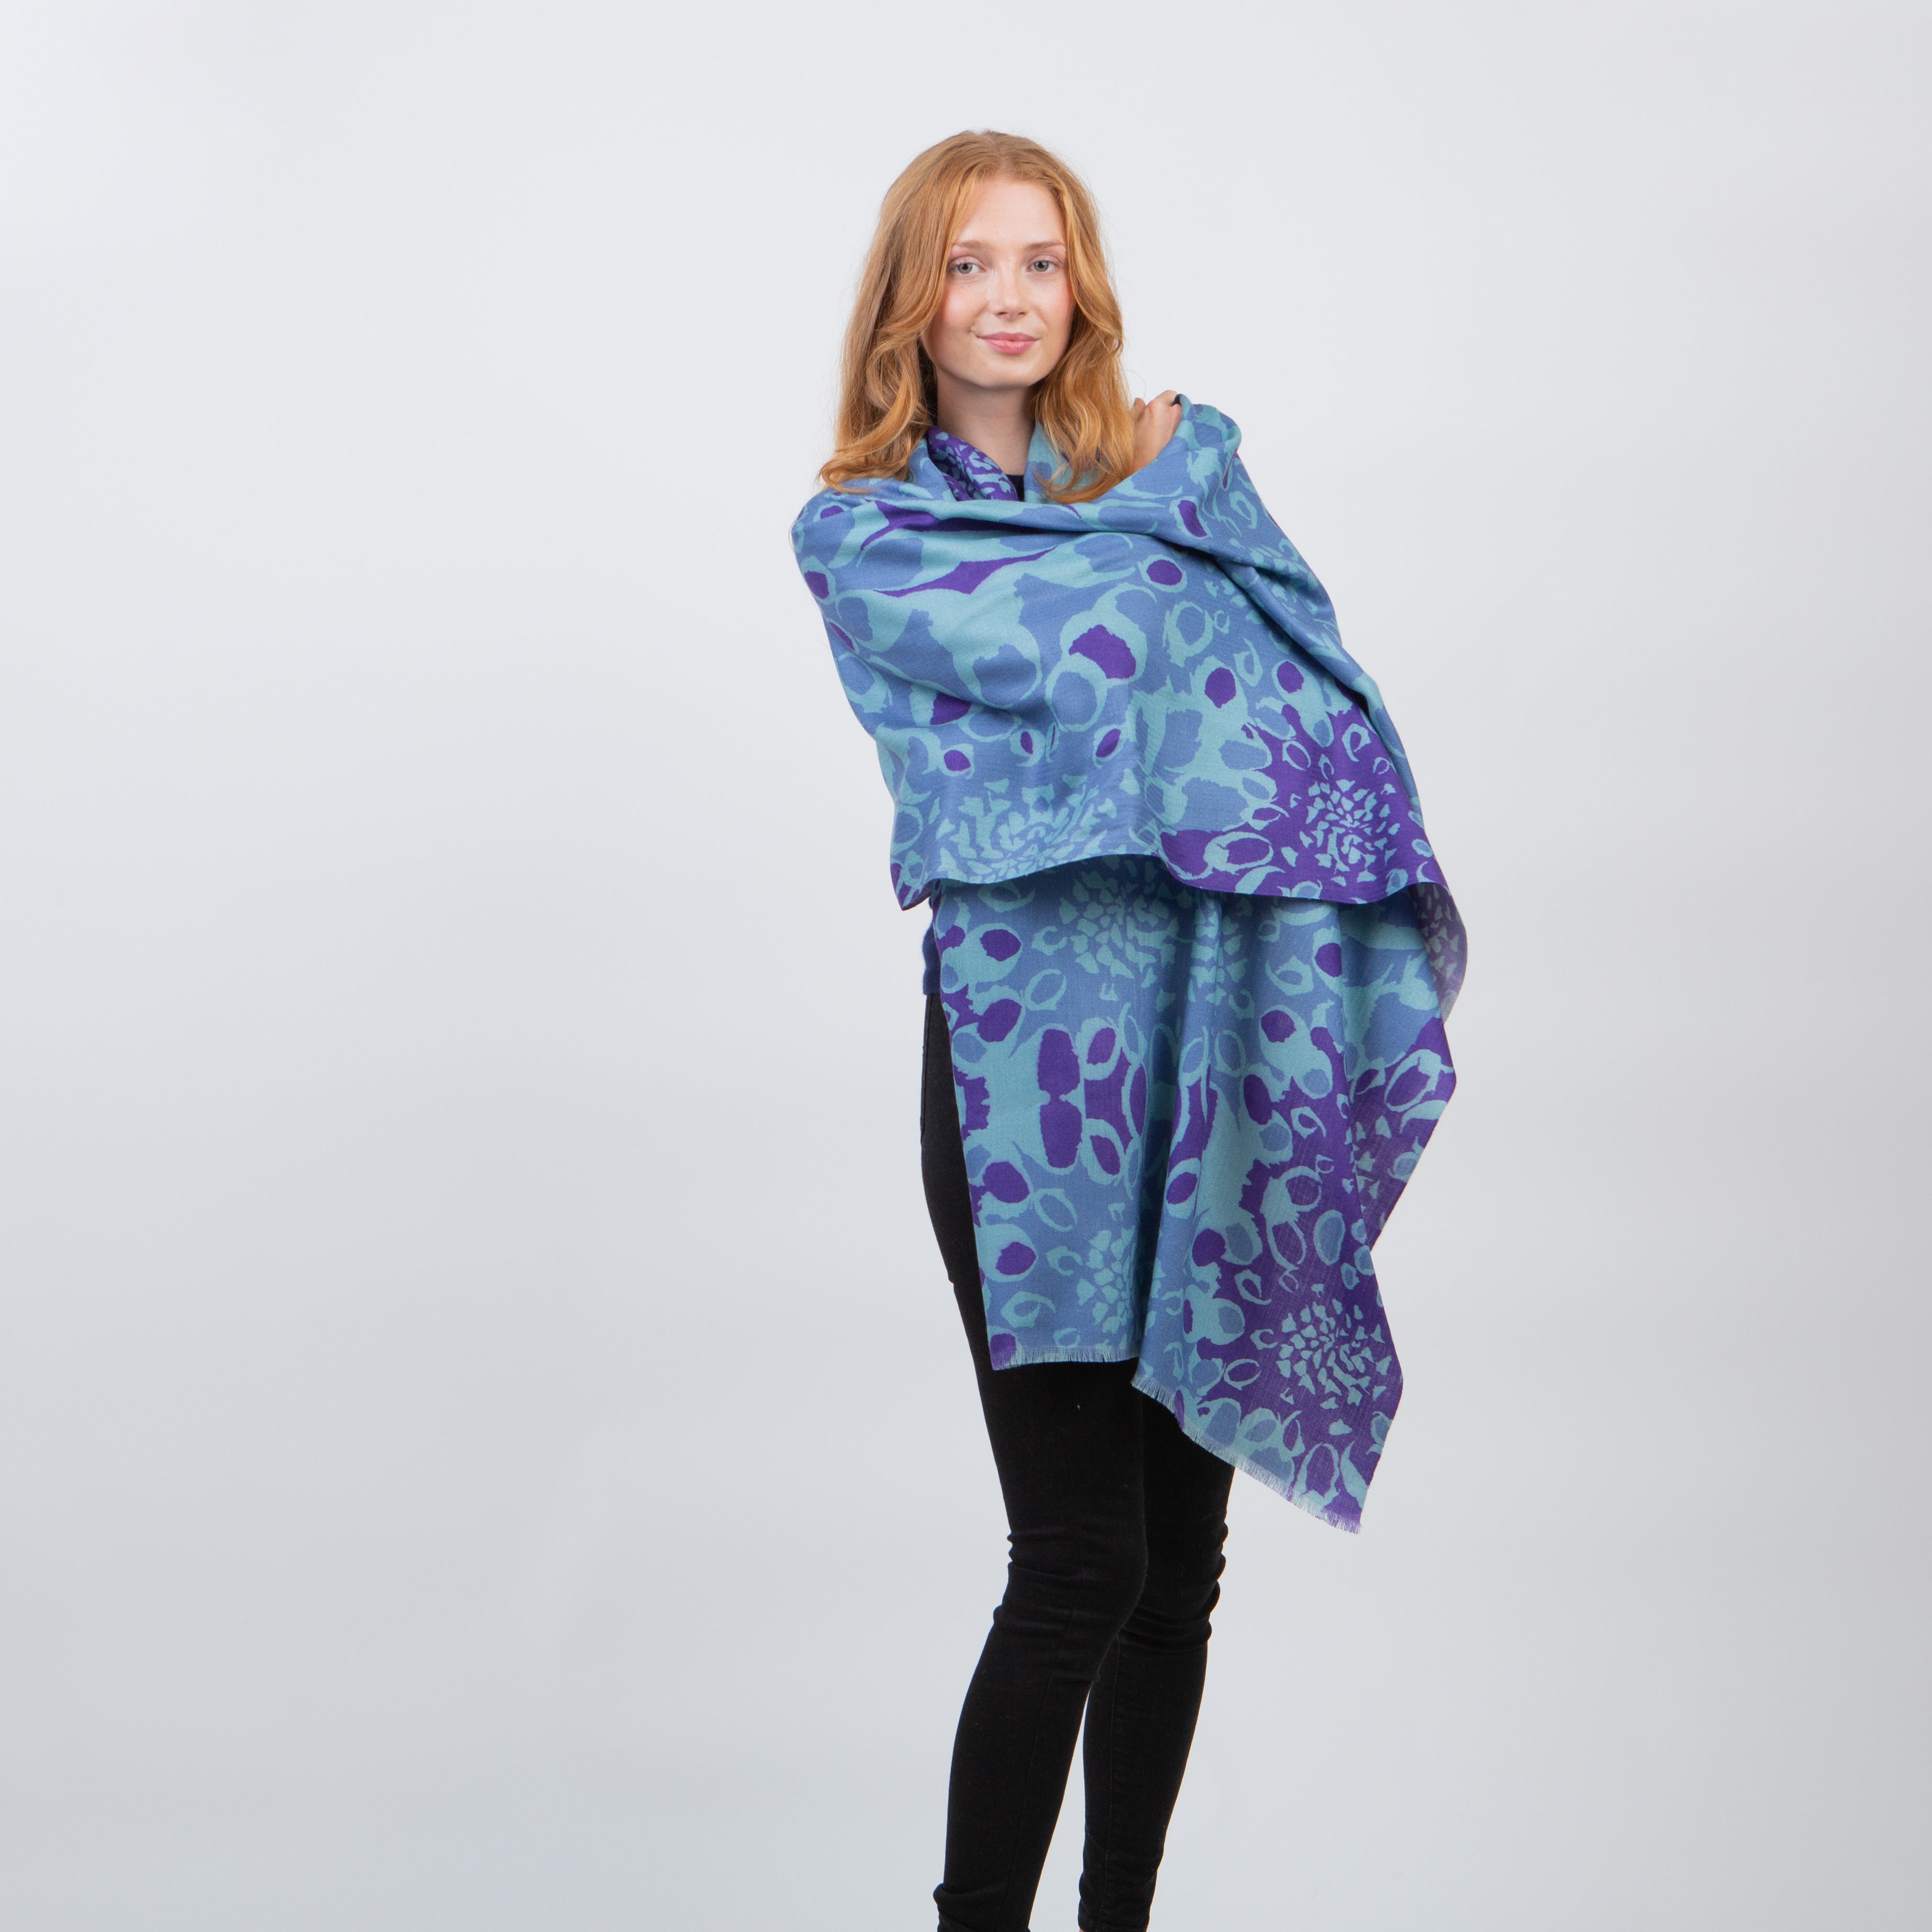 Lambswool and Silk Blend Printed Stole - Denim Enlarged Floral – Kiltane